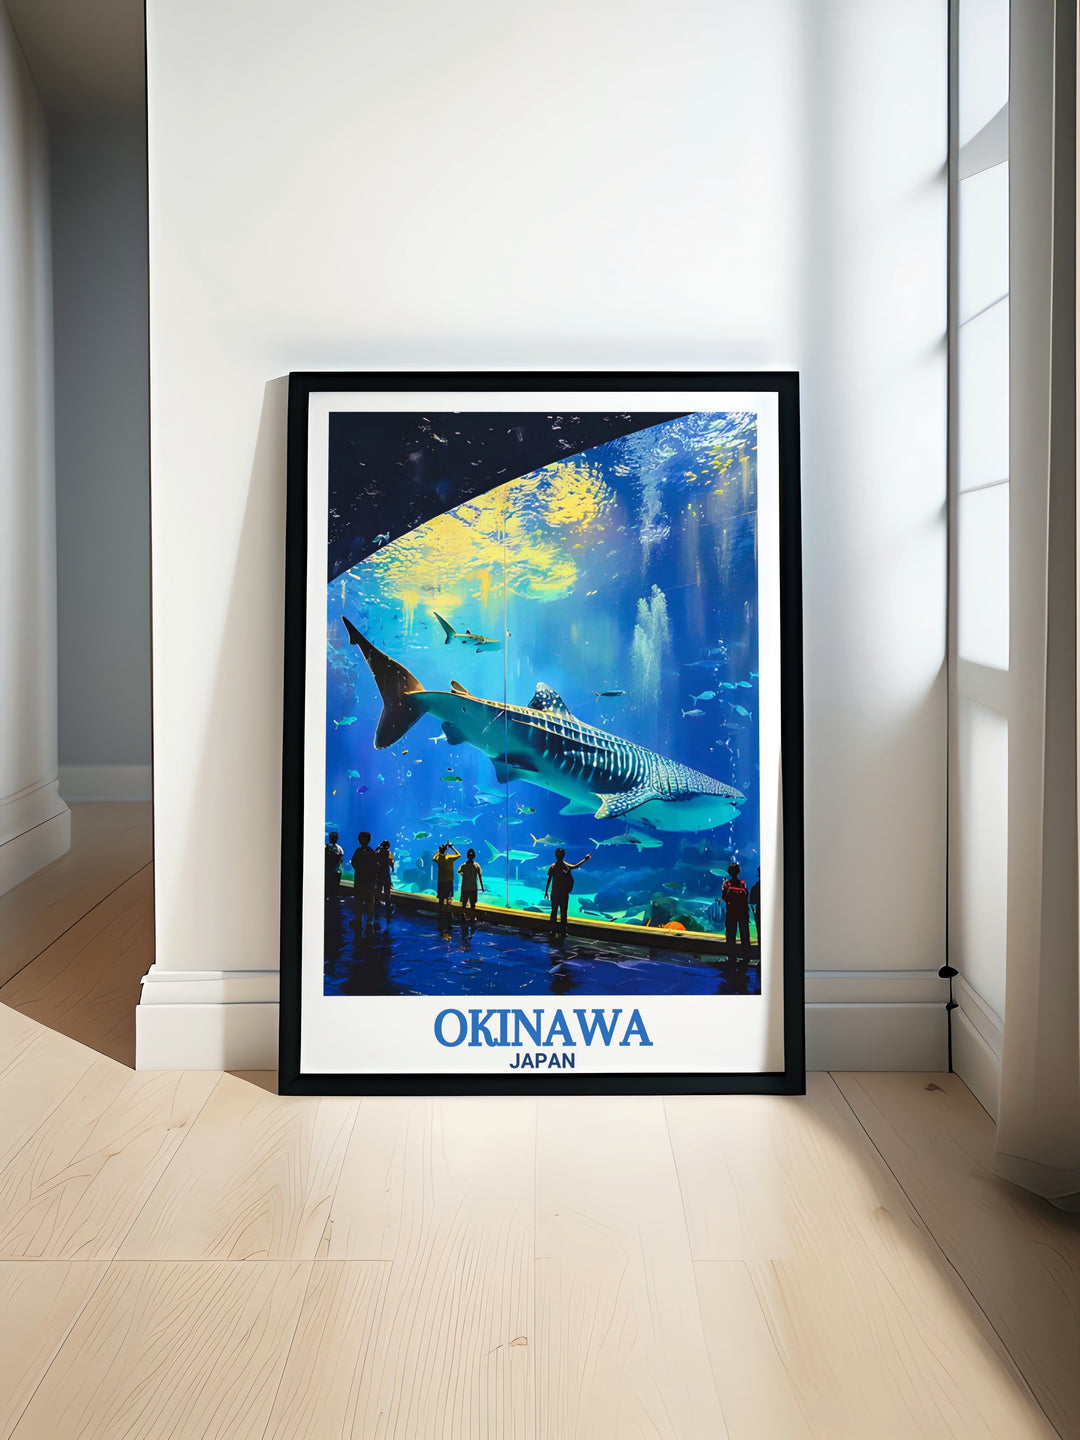 Okinawa Churaumi Aquarium travel poster featuring vibrant marine life and coral reefs perfect for adding a touch of underwater beauty to your home decor and bringing the wonders of the Okinawa Islands into your living space